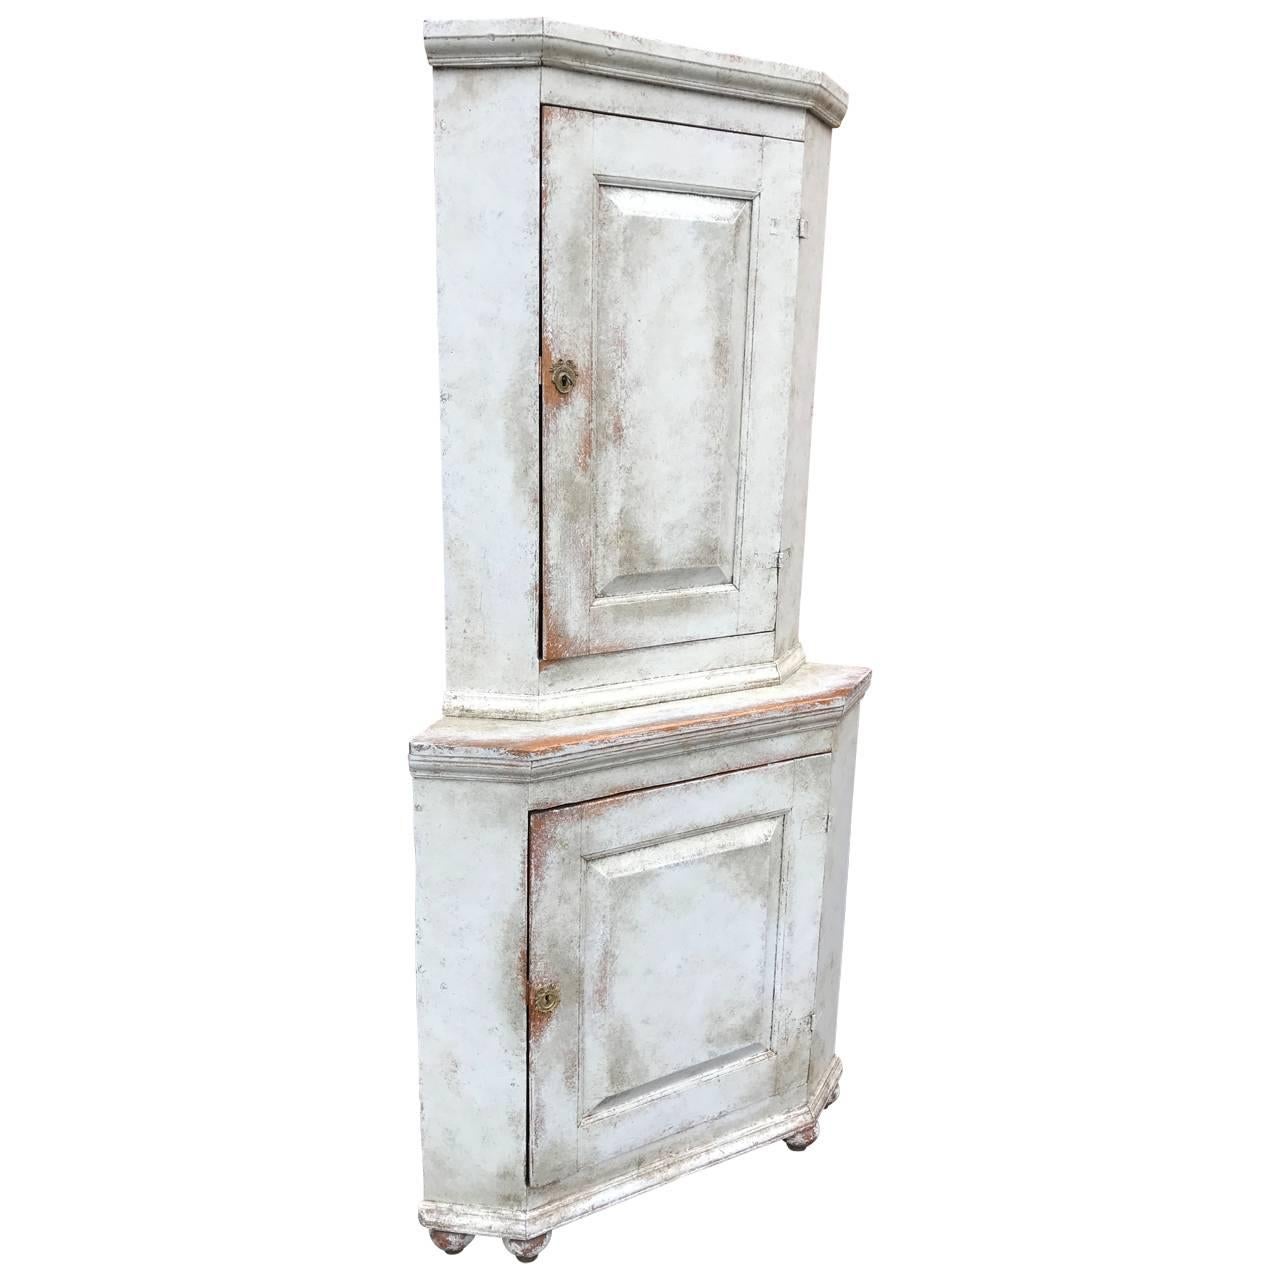 Gustavian one-piece corner cabinet with lower and upper shelved compartments, in Gustavian light blue paint.